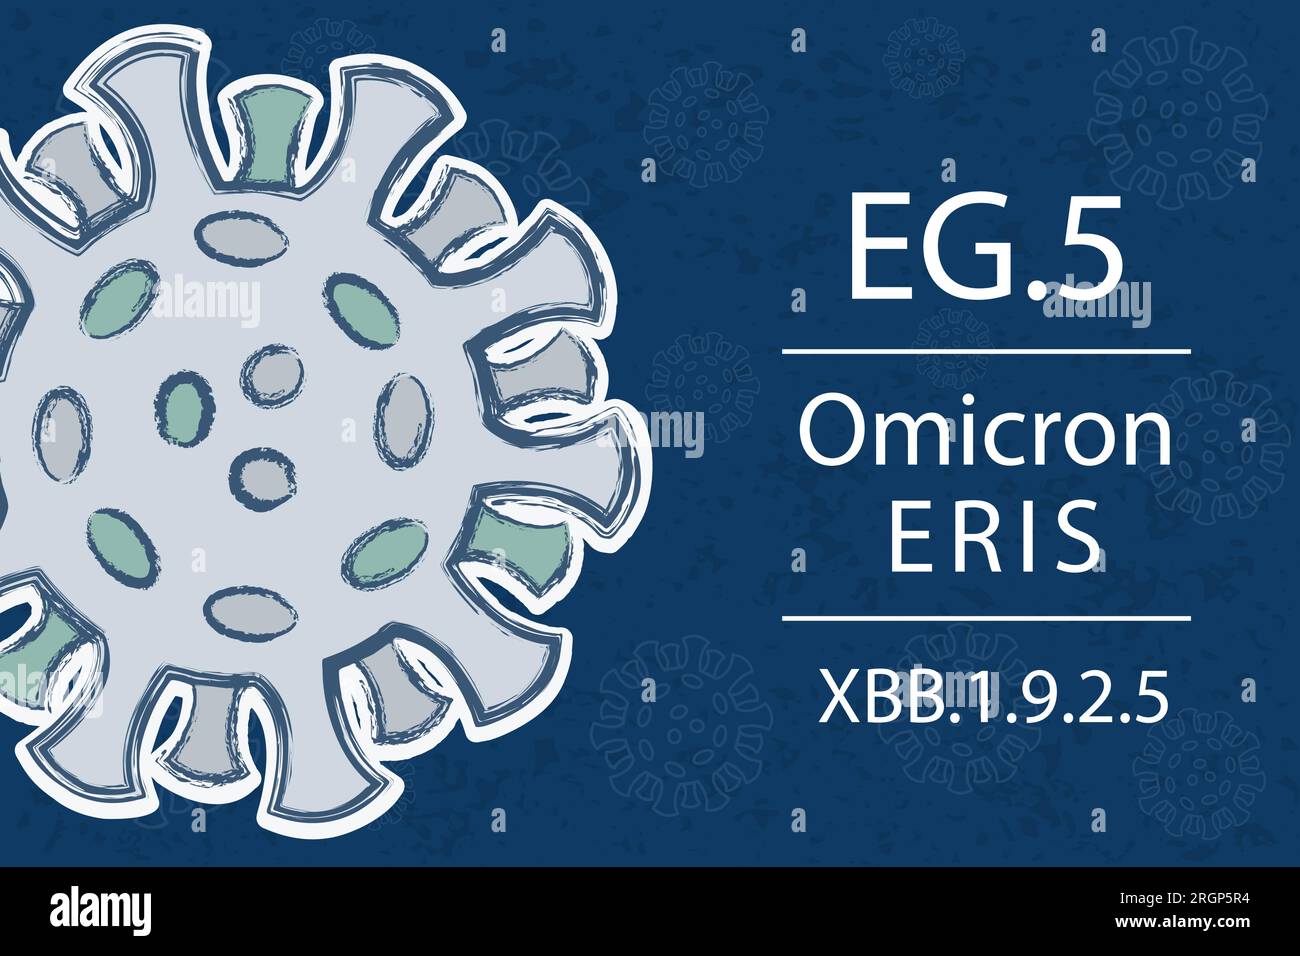 A new Omicron variant EG.5 alias XBB.1.9.2.5. Also known as Eris. White text on dark blue background with image of coronavirus. Stock Vector